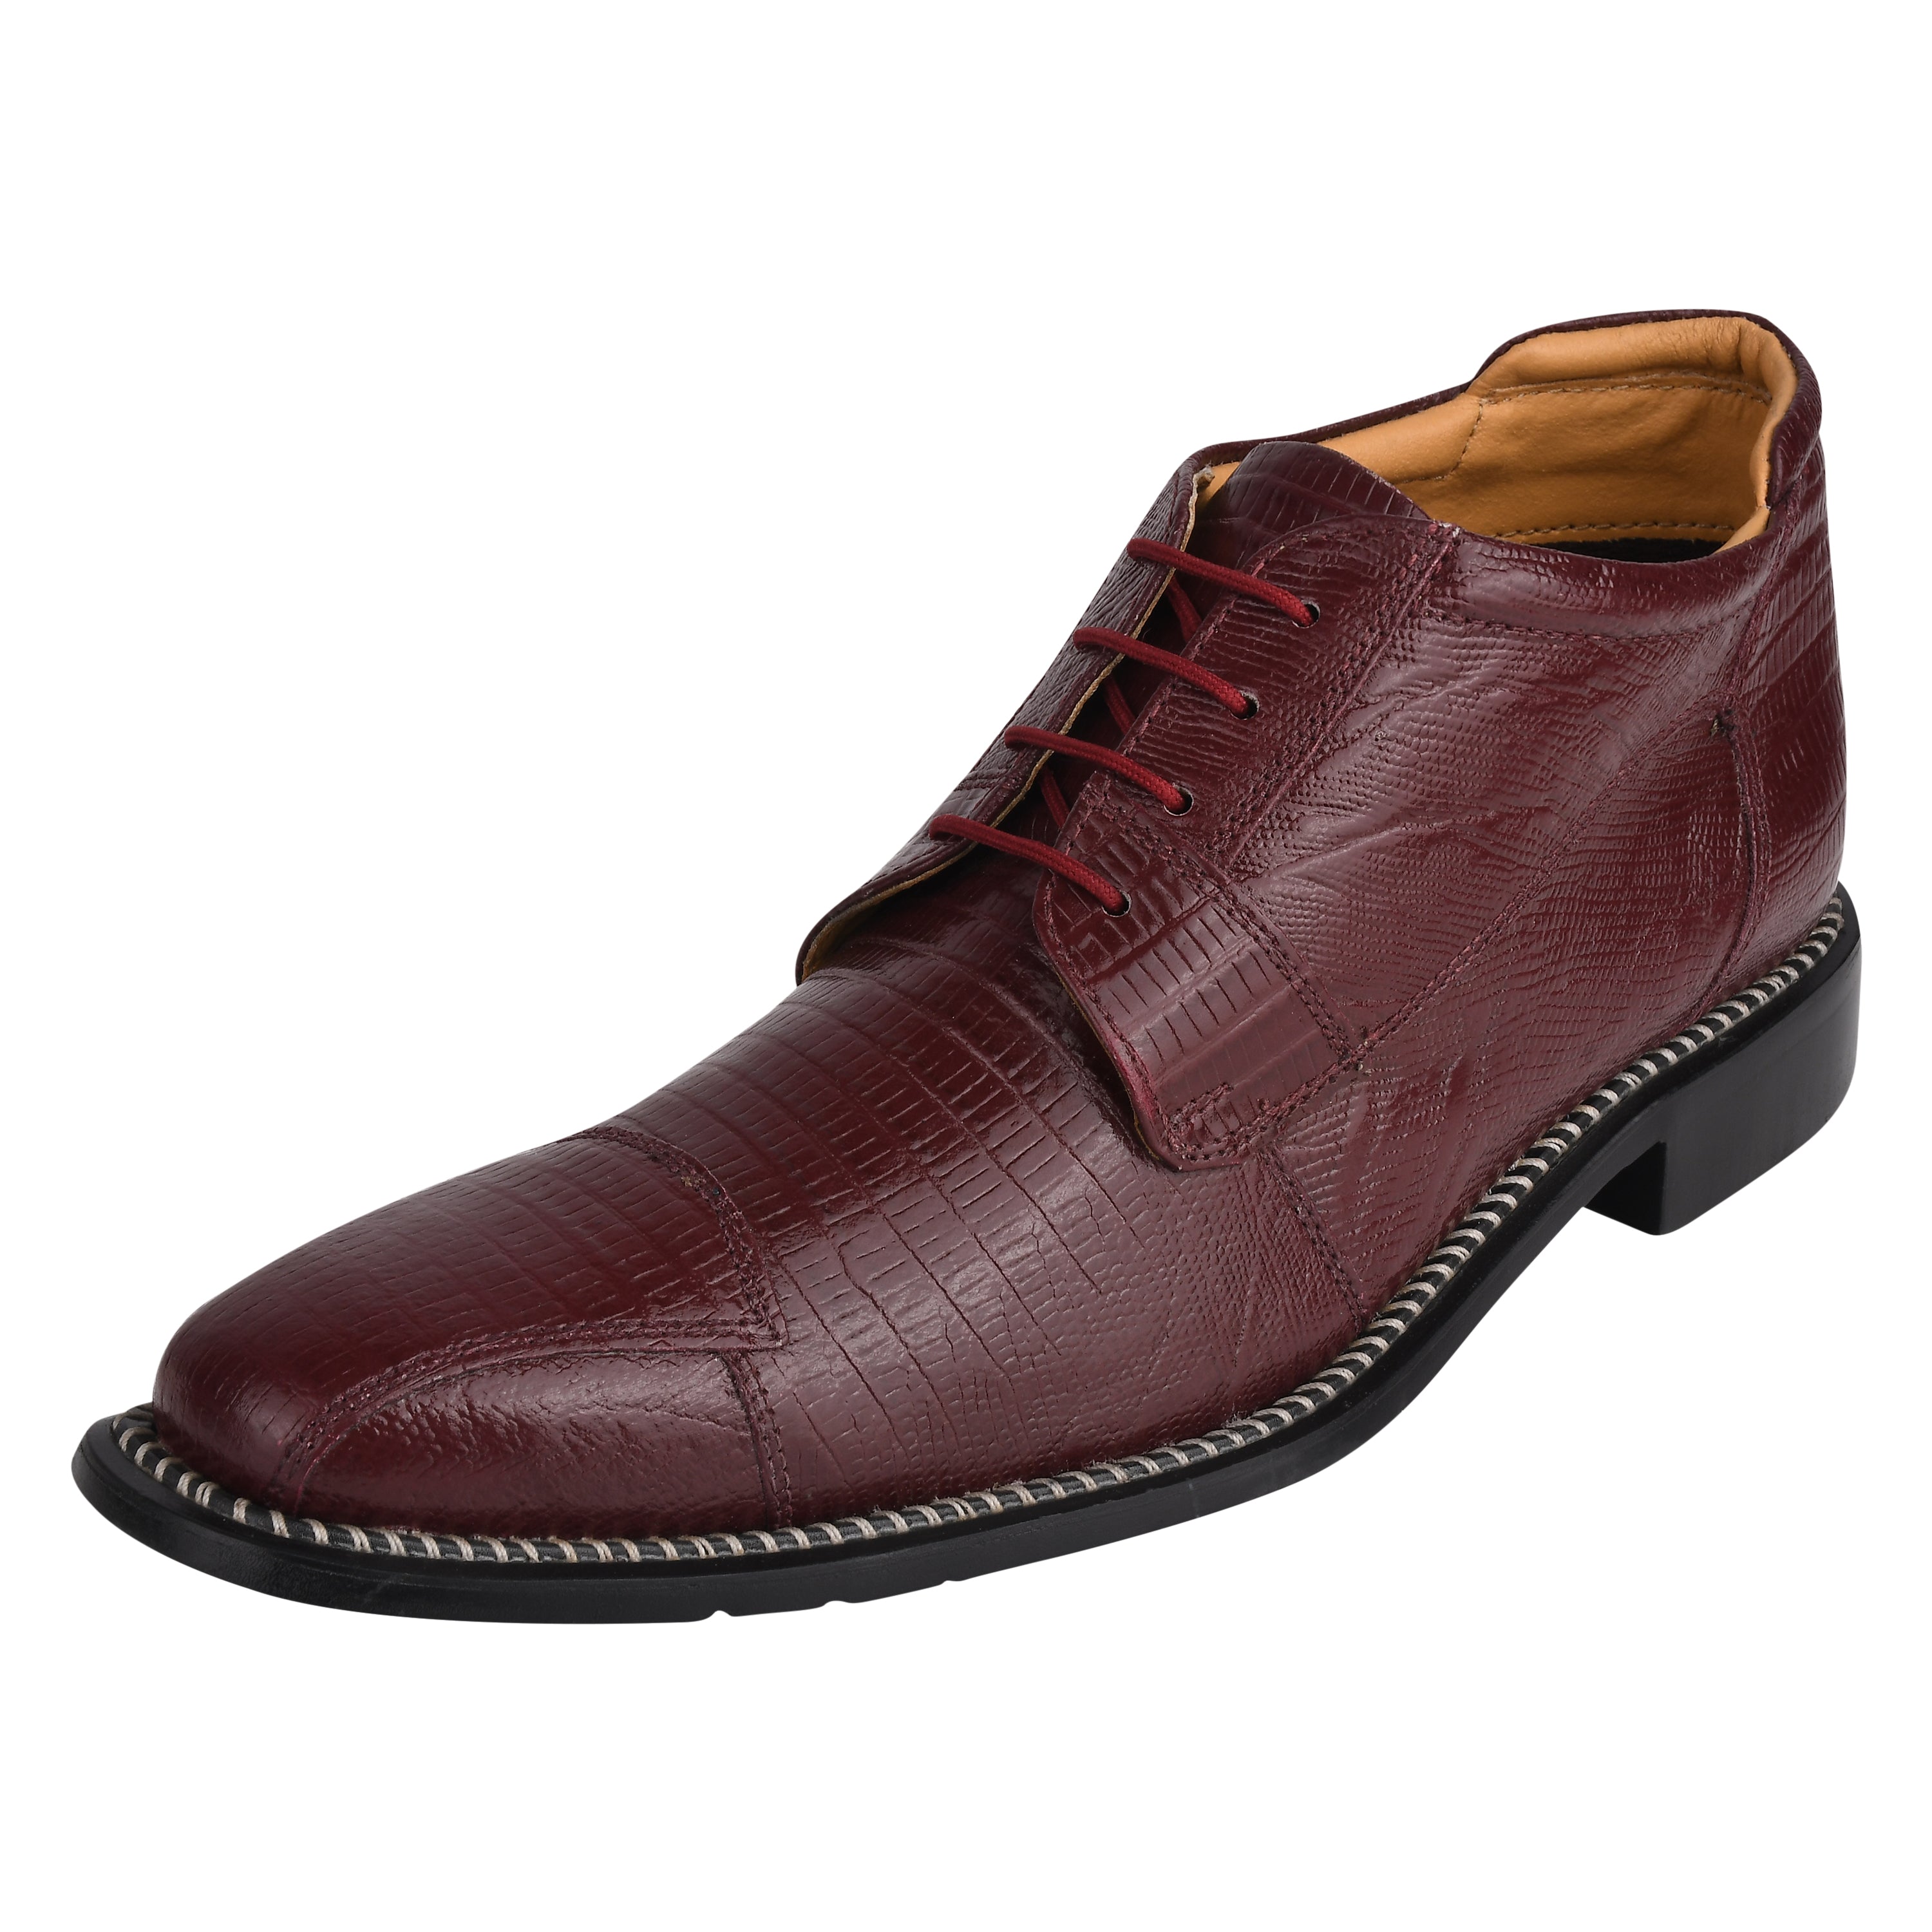 Boyka Leather Red and White Oxford Dress Shoes with Red Bottom – LIBERTYZENO